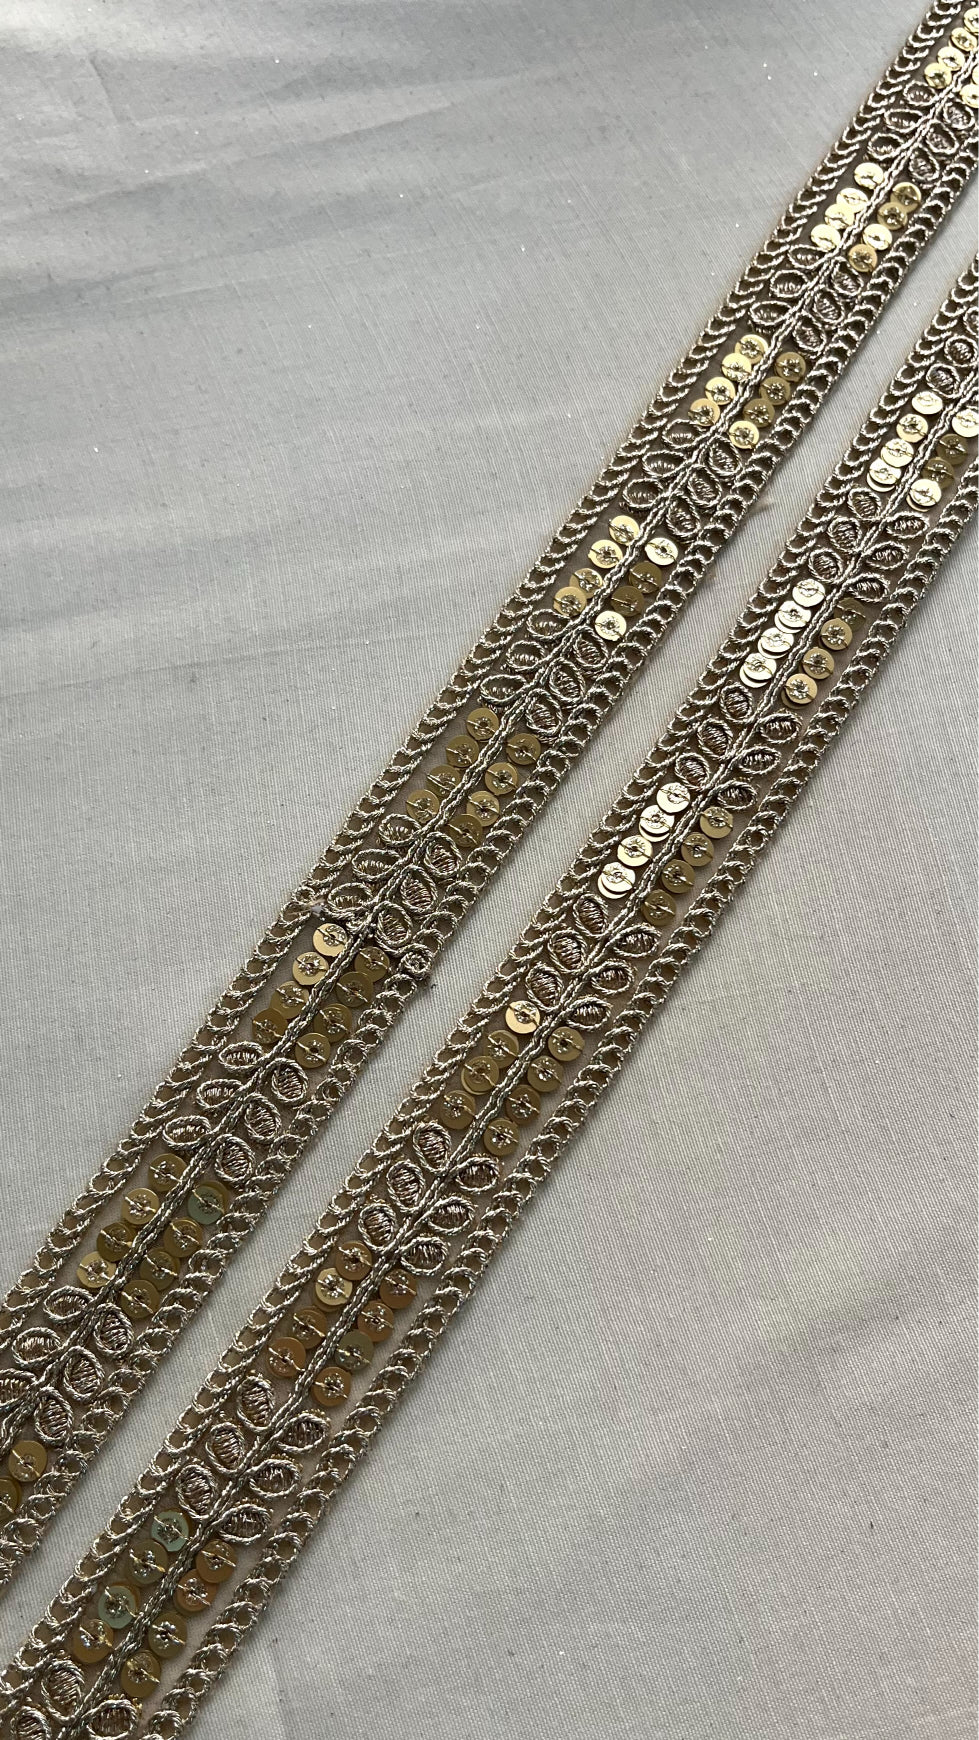 Gold Zari With Gold Sequins Embroidered Lace (9 Meters)